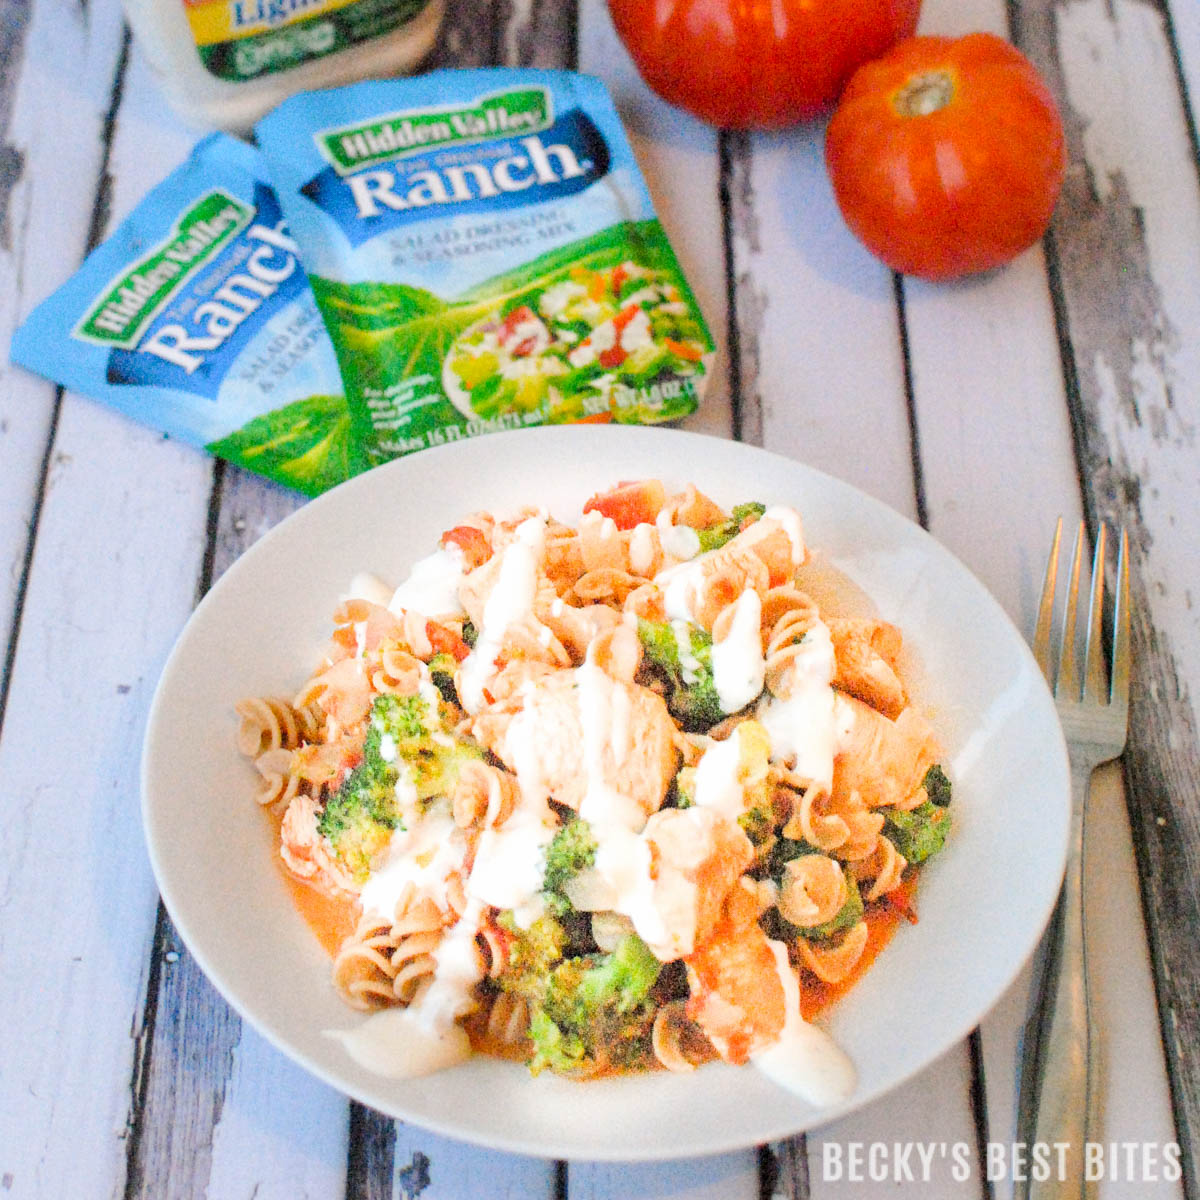 Ranch Buffalo Chicken Pasta with Broccoli is a quick, easy & healthy dinner recipe that the whole family will enjoy! Whole grains, veggies and lean protein combine for a dinner you can be proud of!! | beckysbestbites.com #HiddenValley #Ad